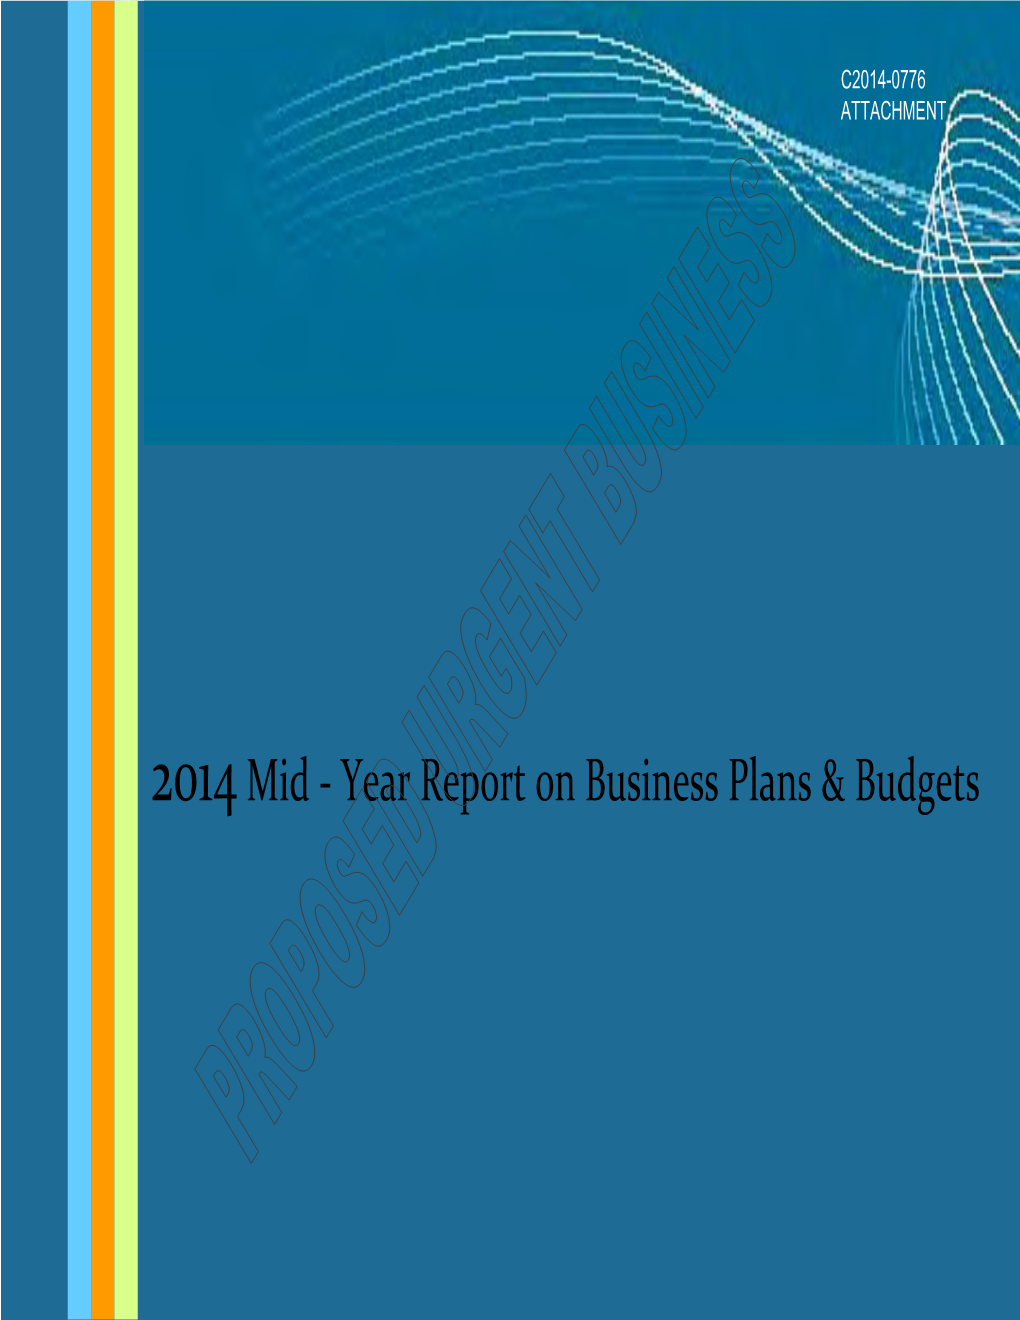 2014 MID-YEAR REPORT on BUSINESS PLANS and BUDGETS ATT 1.PDF Page 1 of 43 ISC: UNRESTRICTED